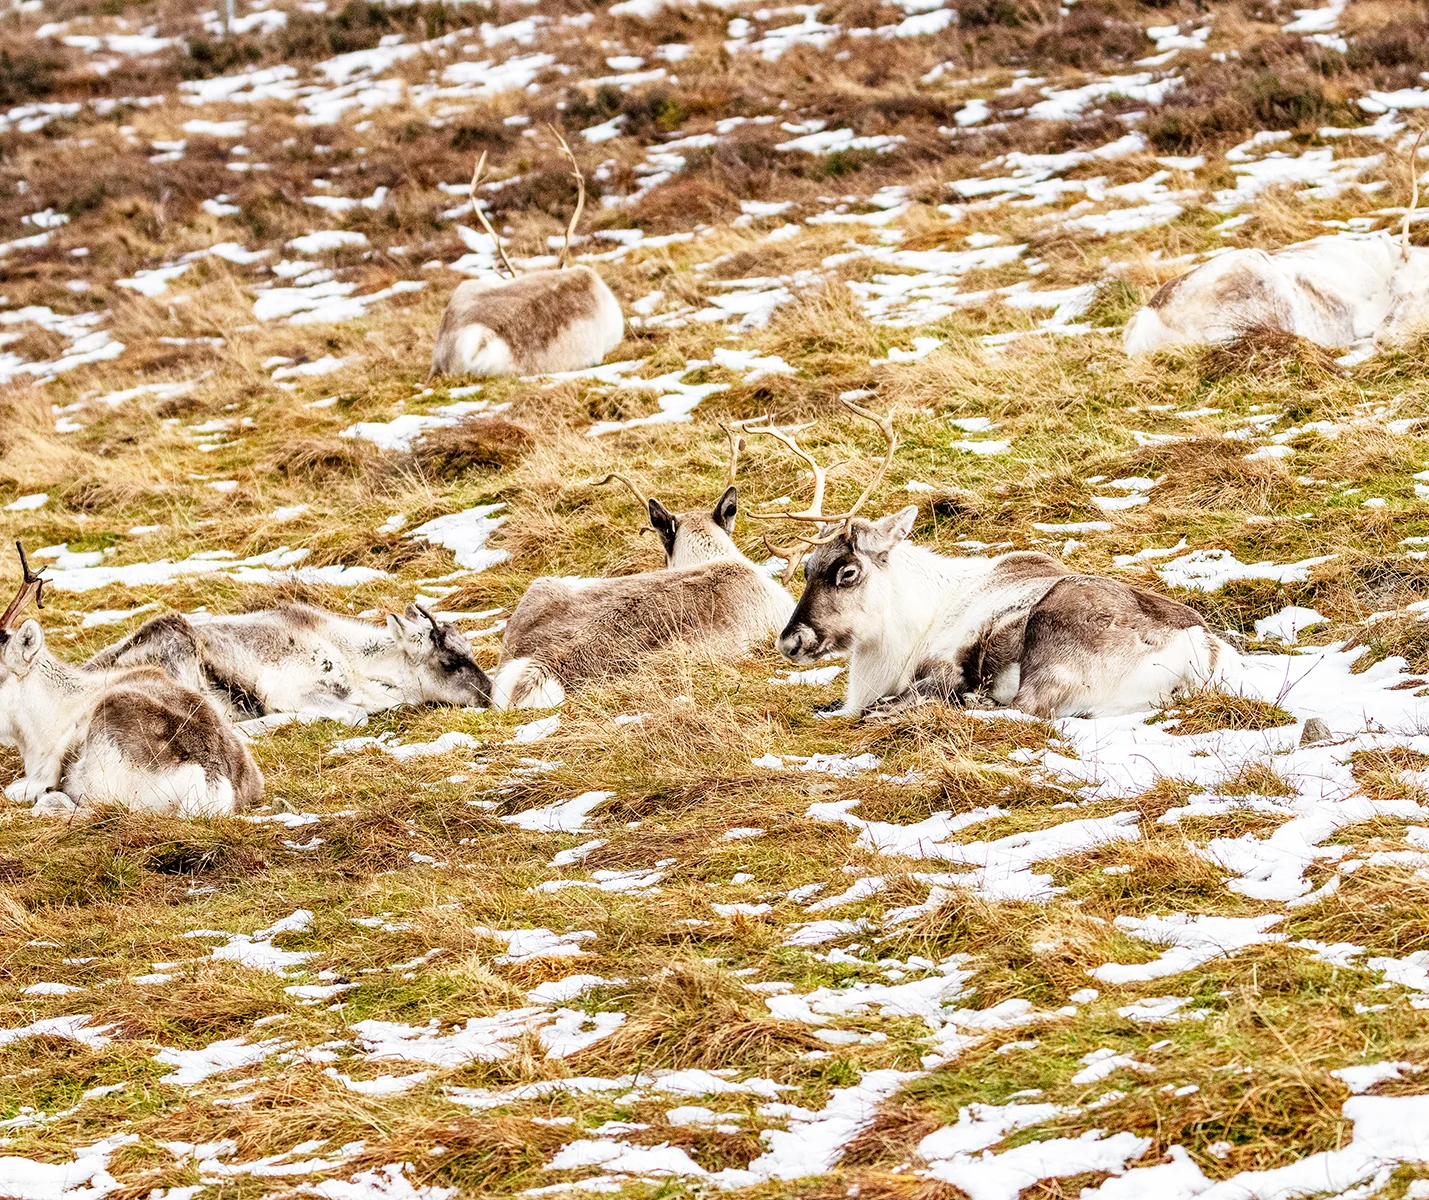 Reindeer lying on grass with patches of snow.